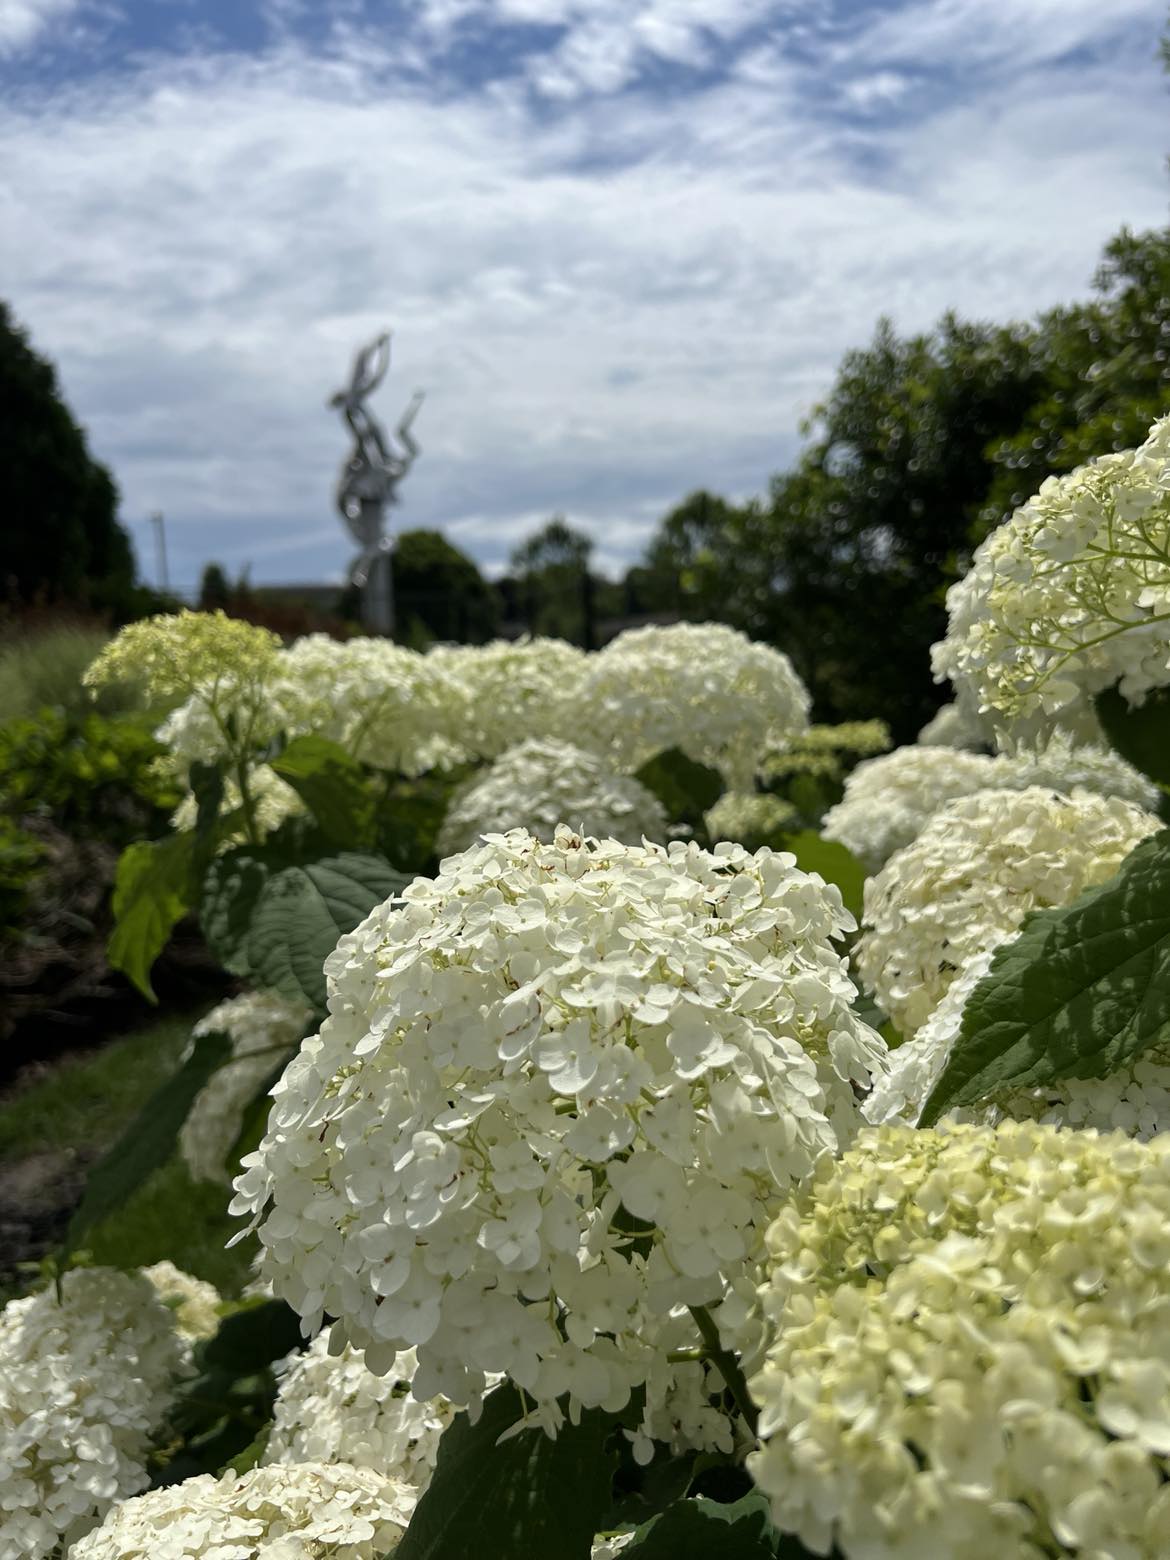 Close-up of a cluster of white hydrangeas in the garden at Applewood Estate, with a metal sculpture visible in the blurred background under a partly cloudy sky.